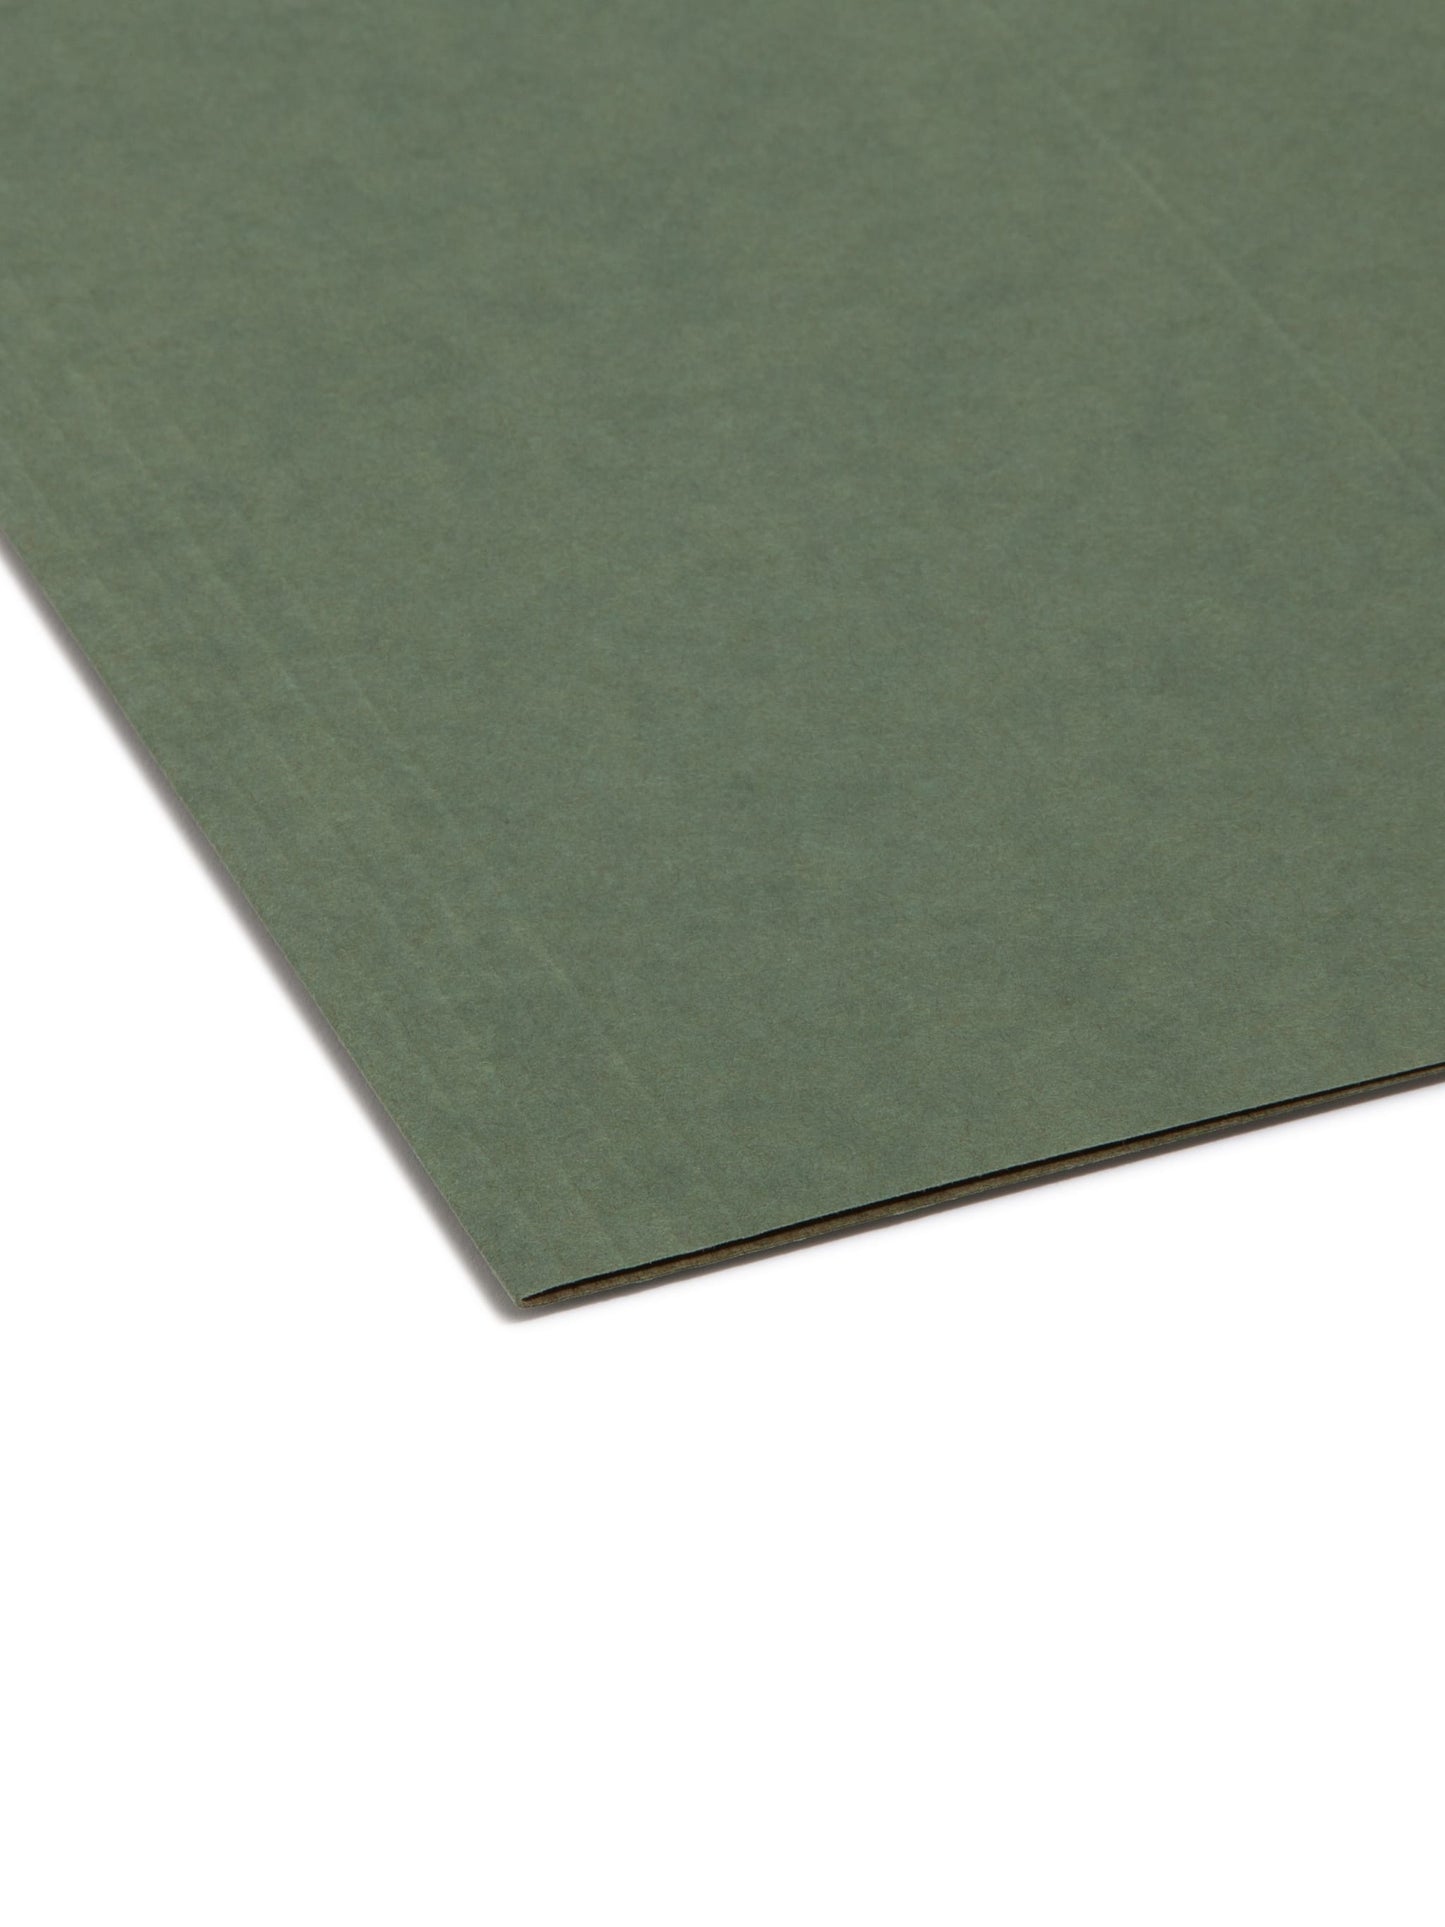 Standard Hanging File Folders with 1/5-Cut Tabs, Standard Green Color, Legal Size, Set of 25, 086486641555